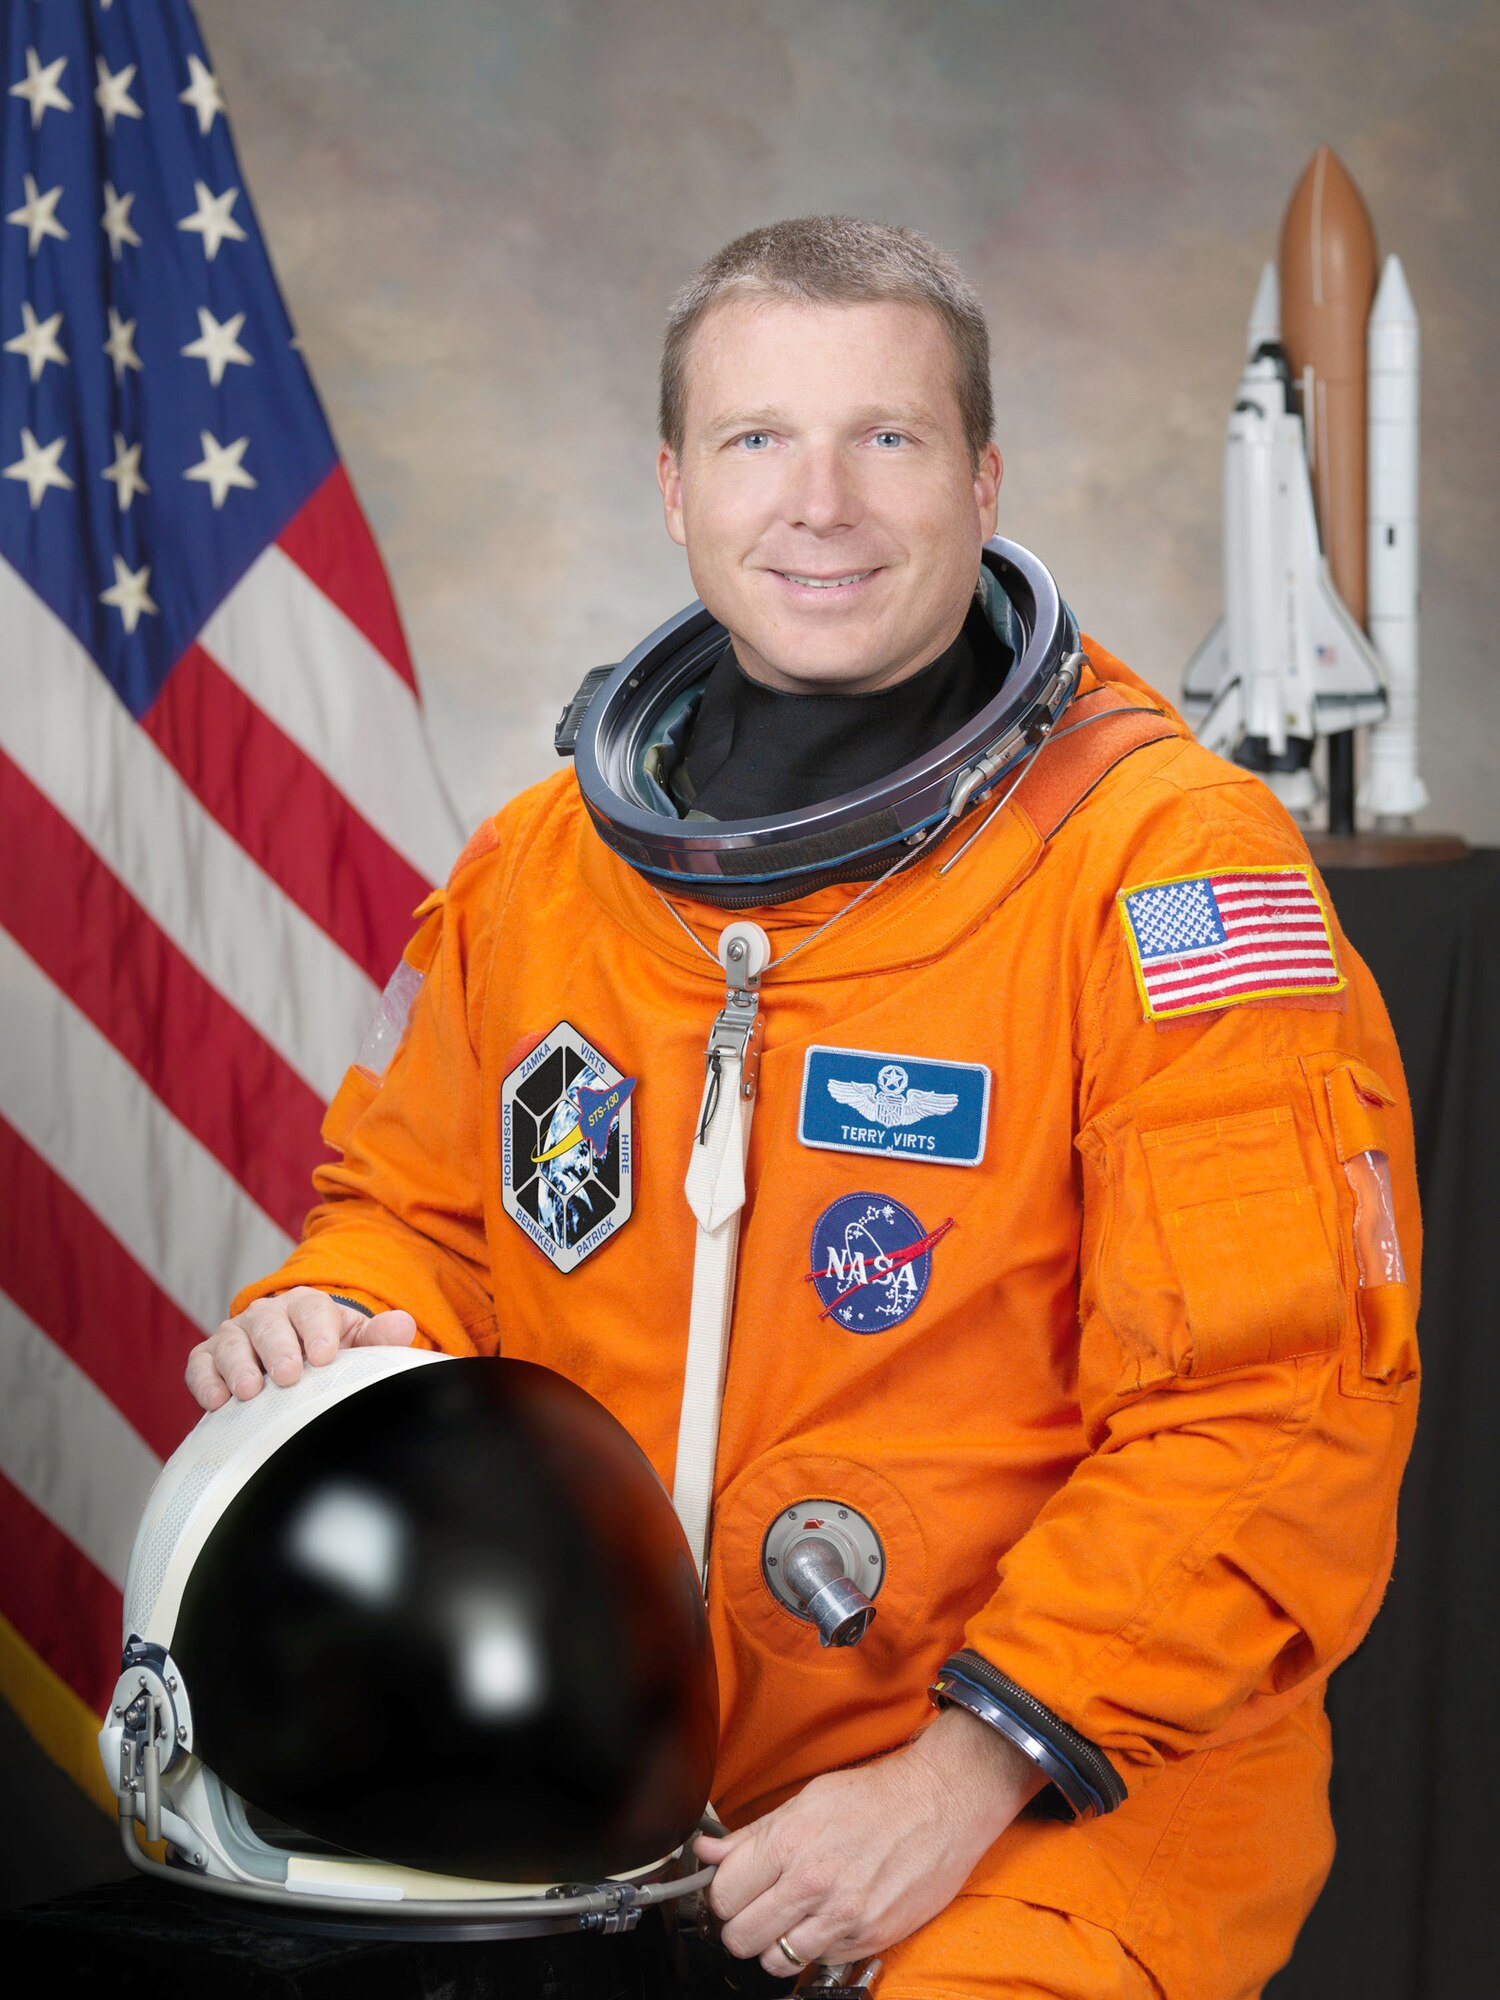 Col. Terry Virts will pilot the Space Shuttle Endeavour during the STS-130 mission scheduled for take off Feb. 7, 2010, from the Kennedy Space Center in Florida. He is an F-16 Fighting Falcon pilot and test pilot with more than 3,800 flying hours and 45 combat missions. (NASA photo)